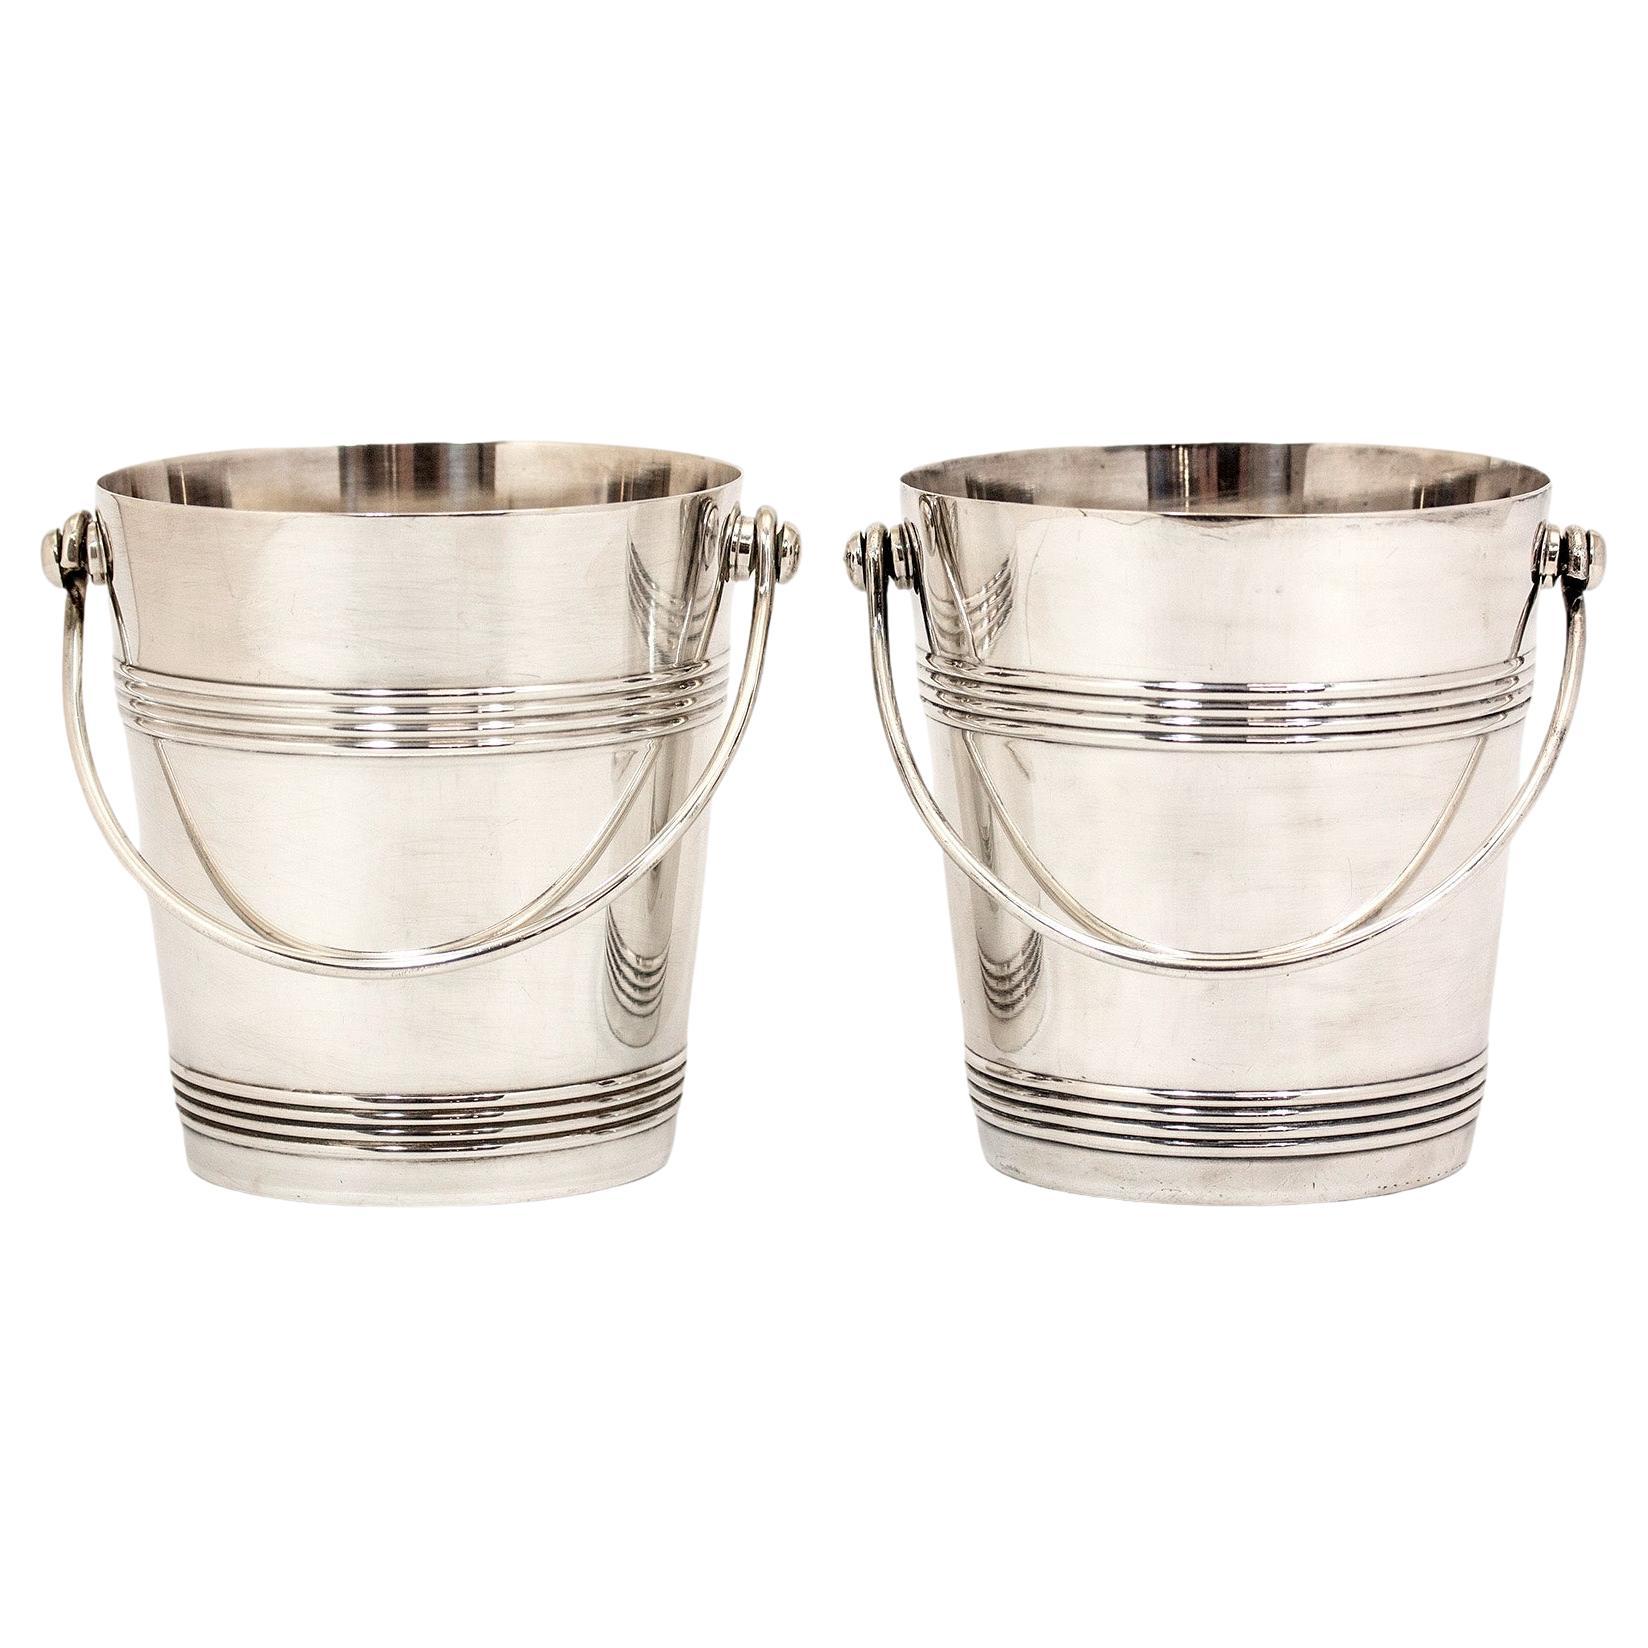 Christofle Pair of Silver Plated Ice Buckets For Sale